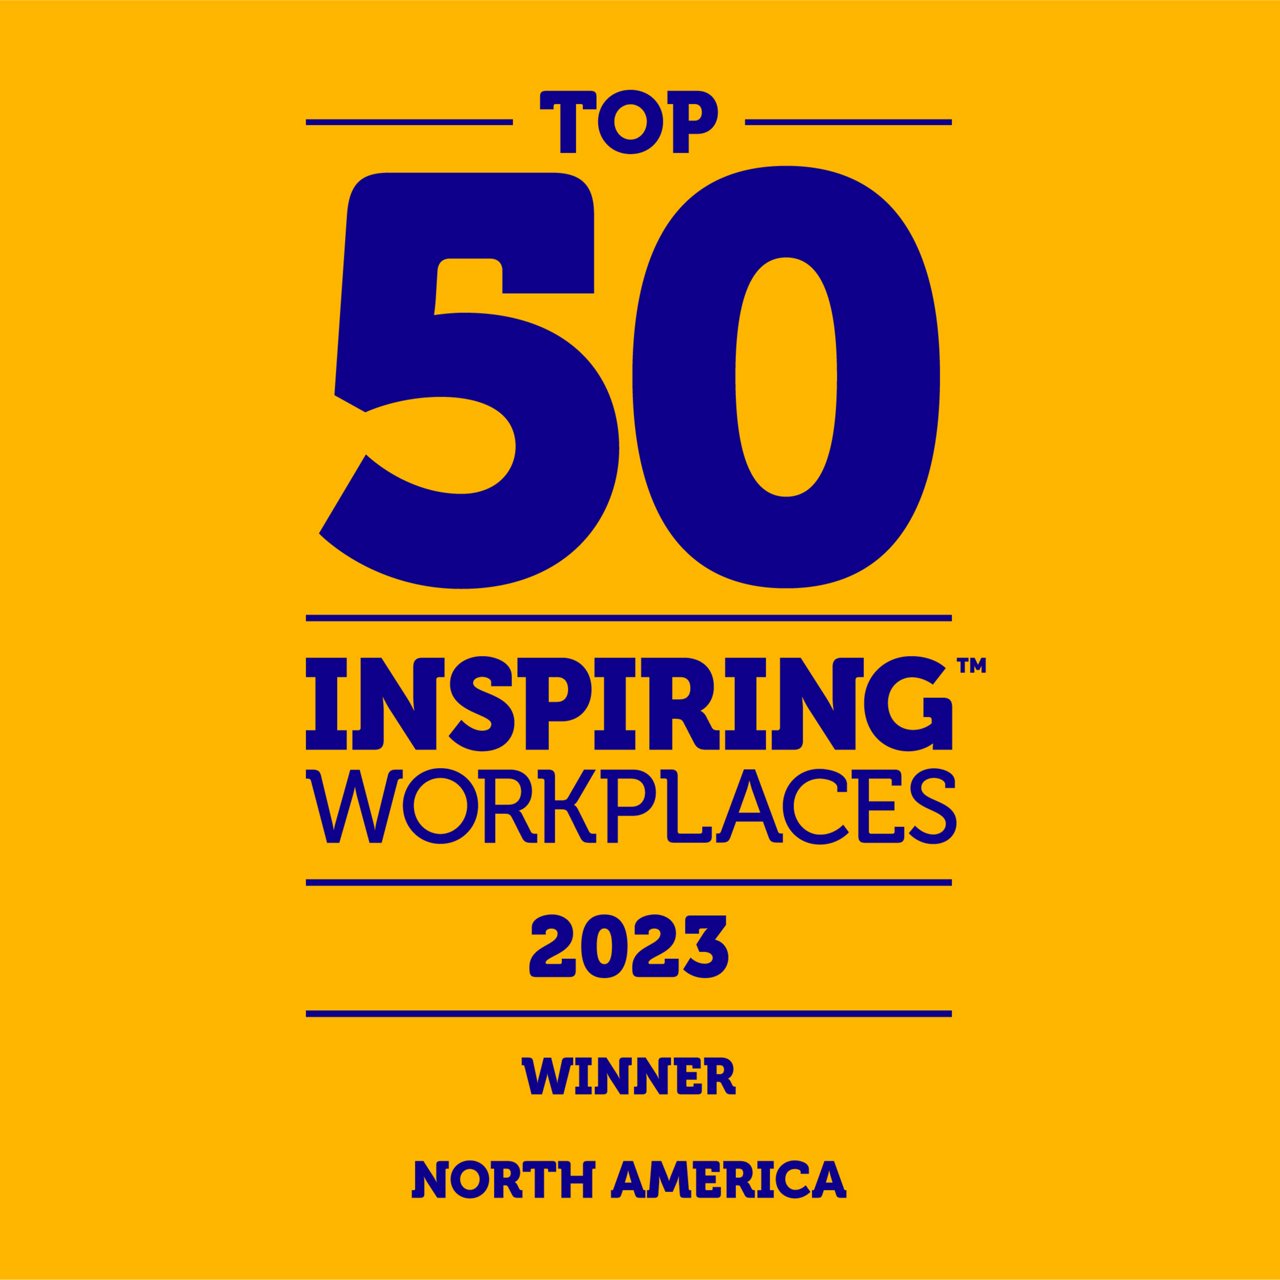 Top 50 Inspiring Workplaces for North America